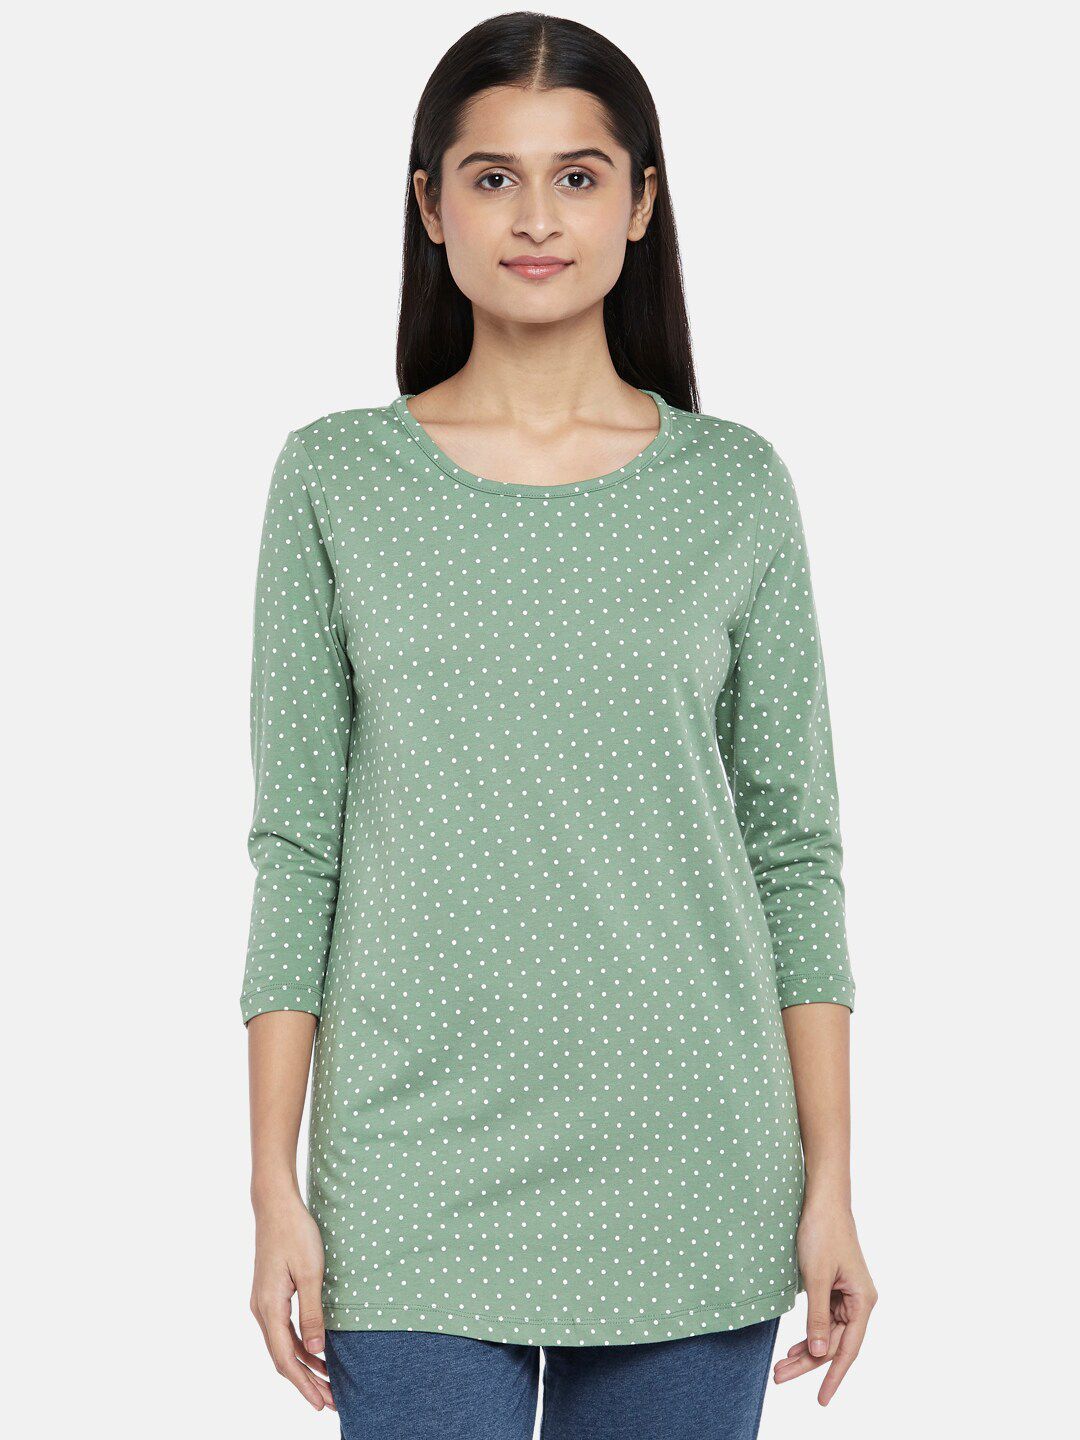 Dreamz by Pantaloons Green Longline Lounge tshirt Price in India